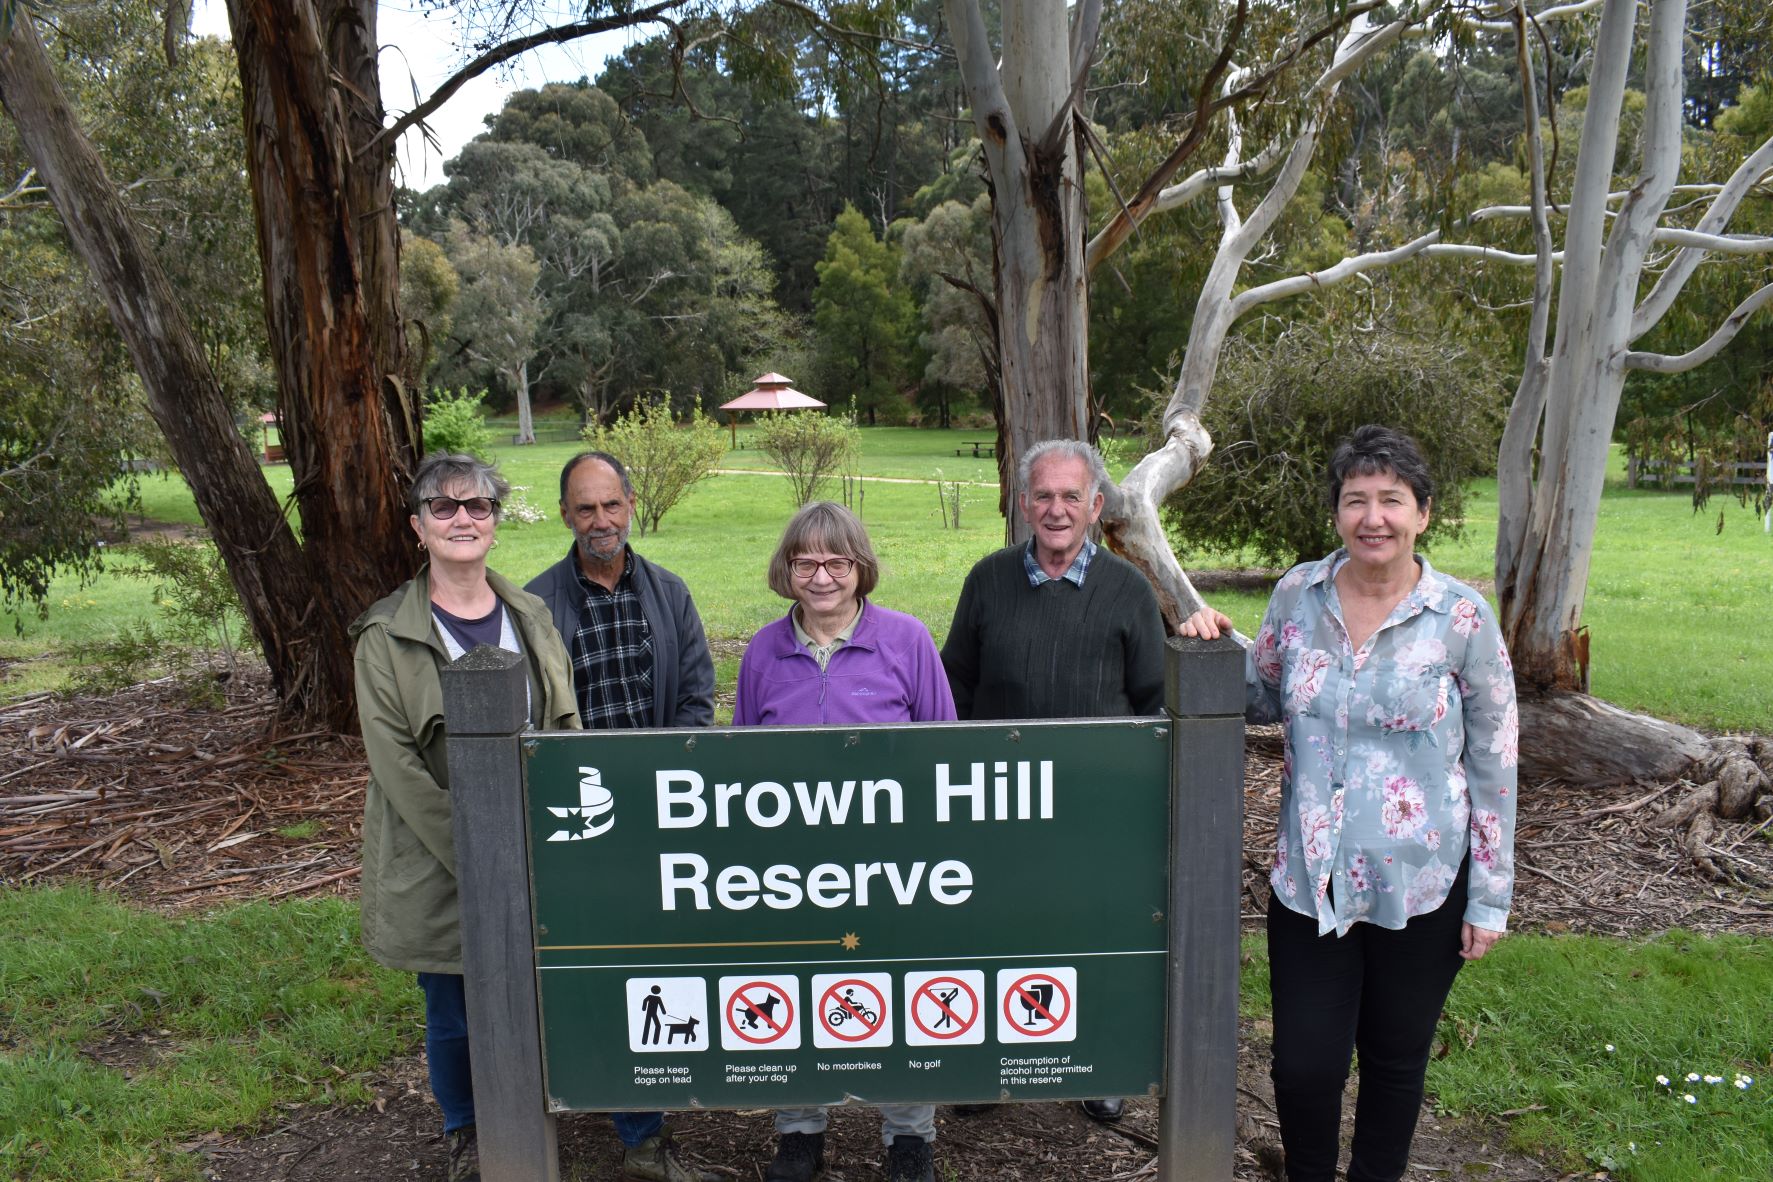 Brown Hill residents with Michaela Settle MP behind a Brown Hill Reserve sign at Brown Hill Reserve  